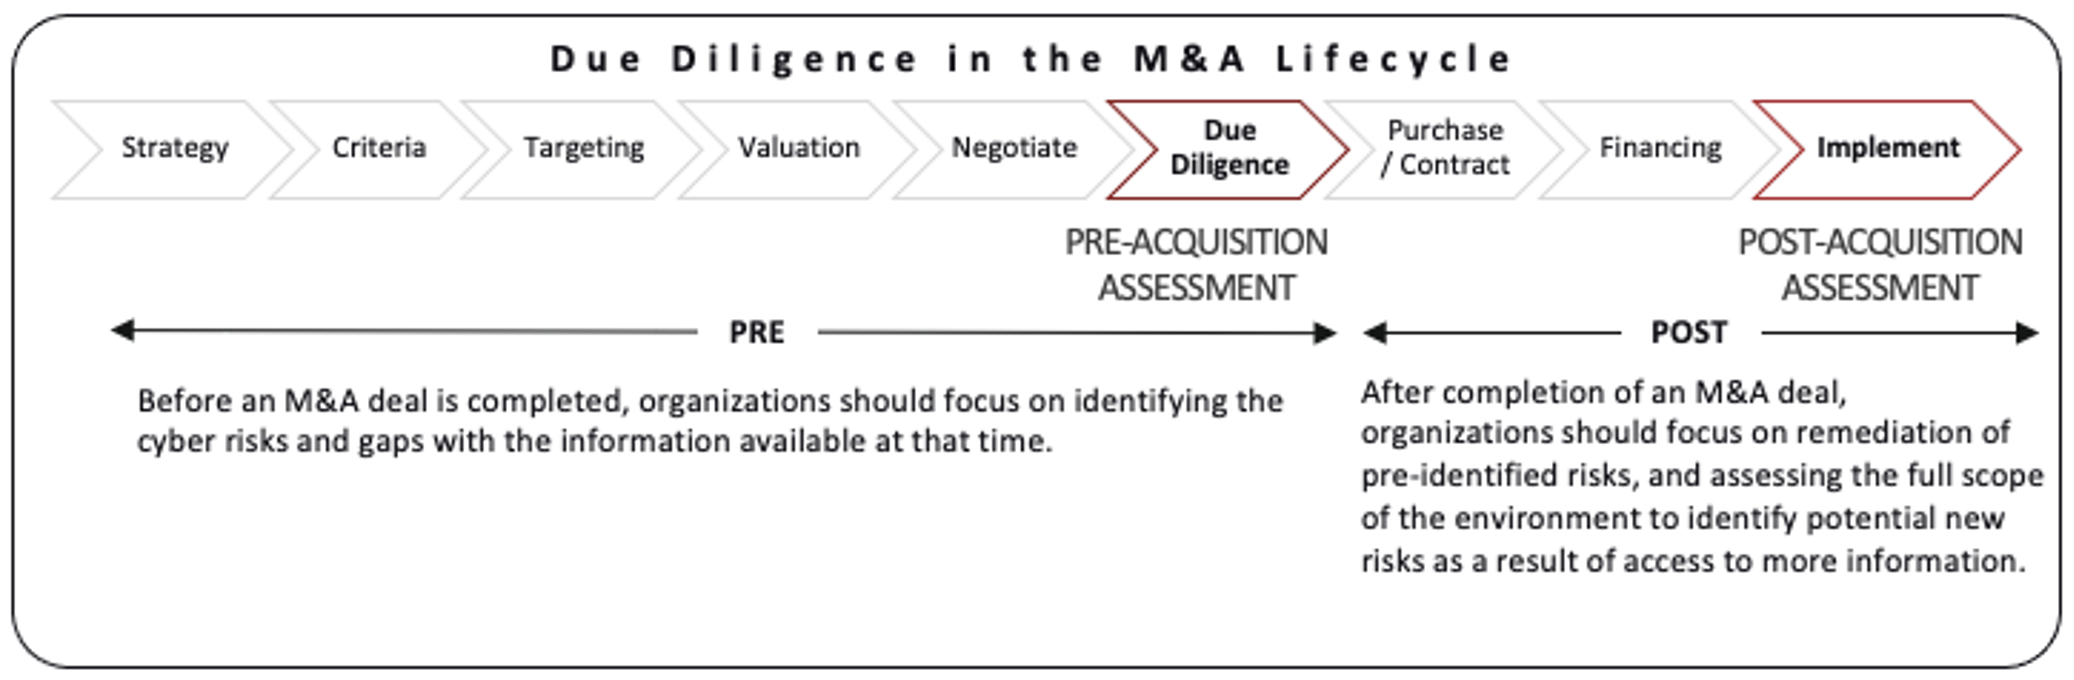 M&A Cyber Due Diligence 